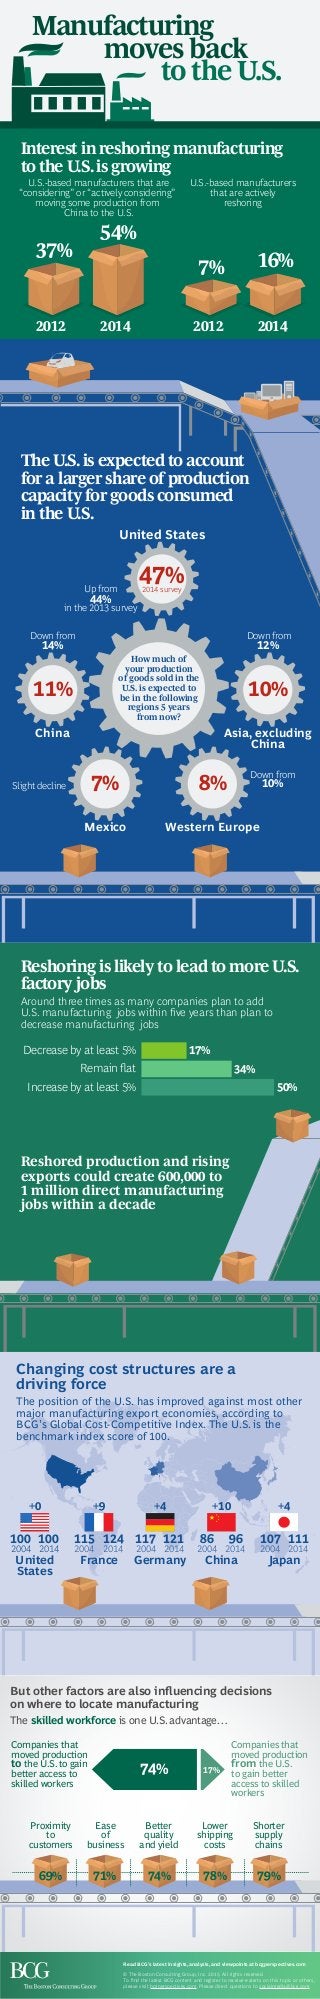 Manufacturing
moves back
to the U.S.
Interest in reshoring manufacturing
to the U.S.is growing
The U.S.is expected to account
for a larger share of production
capacity for goods consumed
in the U.S.
Reshoring is likely to lead to more U.S.
factory jobs
U.S.-based manufacturers that are
“considering” or “actively considering”
moving some production from
China to the U.S.
Around three times as many companies plan to add
U.S. manufacturing jobs within ﬁve years than plan to
decrease manufacturing jobs
U.S.-based manufacturers
that are actively
reshoring
37%
54%
7% 16%
2012 20122014 2014
Decrease by at least 5% 17%
34%
50%
Remain ﬂat
Increase by at least 5%
Reshored production and rising
exports could create 600,000 to
1 million direct manufacturing
jobs within a decade
But other factors are also inﬂuencing decisions
on where to locate manufacturing
The skilled workforce is one U.S. advantage…
Companies that
moved production
from the U.S.
to gain better
access to skilled
workers
Companies that
moved production
to the U.S. to gain
better access to
skilled workers
17%74%
Changing cost structures are a
driving force
100
2004
100
2014
117
2004
121
2014
Germany China
86
2004
96
2014
France
115
2004
124
2014
Japan
107
2004
111
2014
United
States
The position of the U.S. has improved against most other
major manufacturing export economies, according to
BCG’s Global Cost-Competitive Index. The U.S. is the
benchmark index score of 100.
+0 +9 +4 +10 +4
United States
China Asia, excluding
China
Mexico
44%
in the 2013 survey
Up from
47%2014 survey
Western Europe
How much of
your production
of goods sold in the
U.S. is expected to
be in the following
regions 5 years
from now?
14%
Down from
12%
Down from
10%
Down from
Slight decline
11%
7% 8%
10%
Proximity
to
customers
Ease
of
business
Better
quality
and yield
Lower
shipping
costs
Shorter
supply
chains
71%69% 79%74% 78%
Read BCG’s latest insights, analysis, and viewpoints at bcgperspectives.com
© The Boston Consulting Group, Inc. 2015. All rights reserved.
To ﬁnd the latest BCG content and register to receive e-alerts on this topic or others,
please visit bcgperspectives.com. Please direct questions to socialmedia@bcg.com.
 